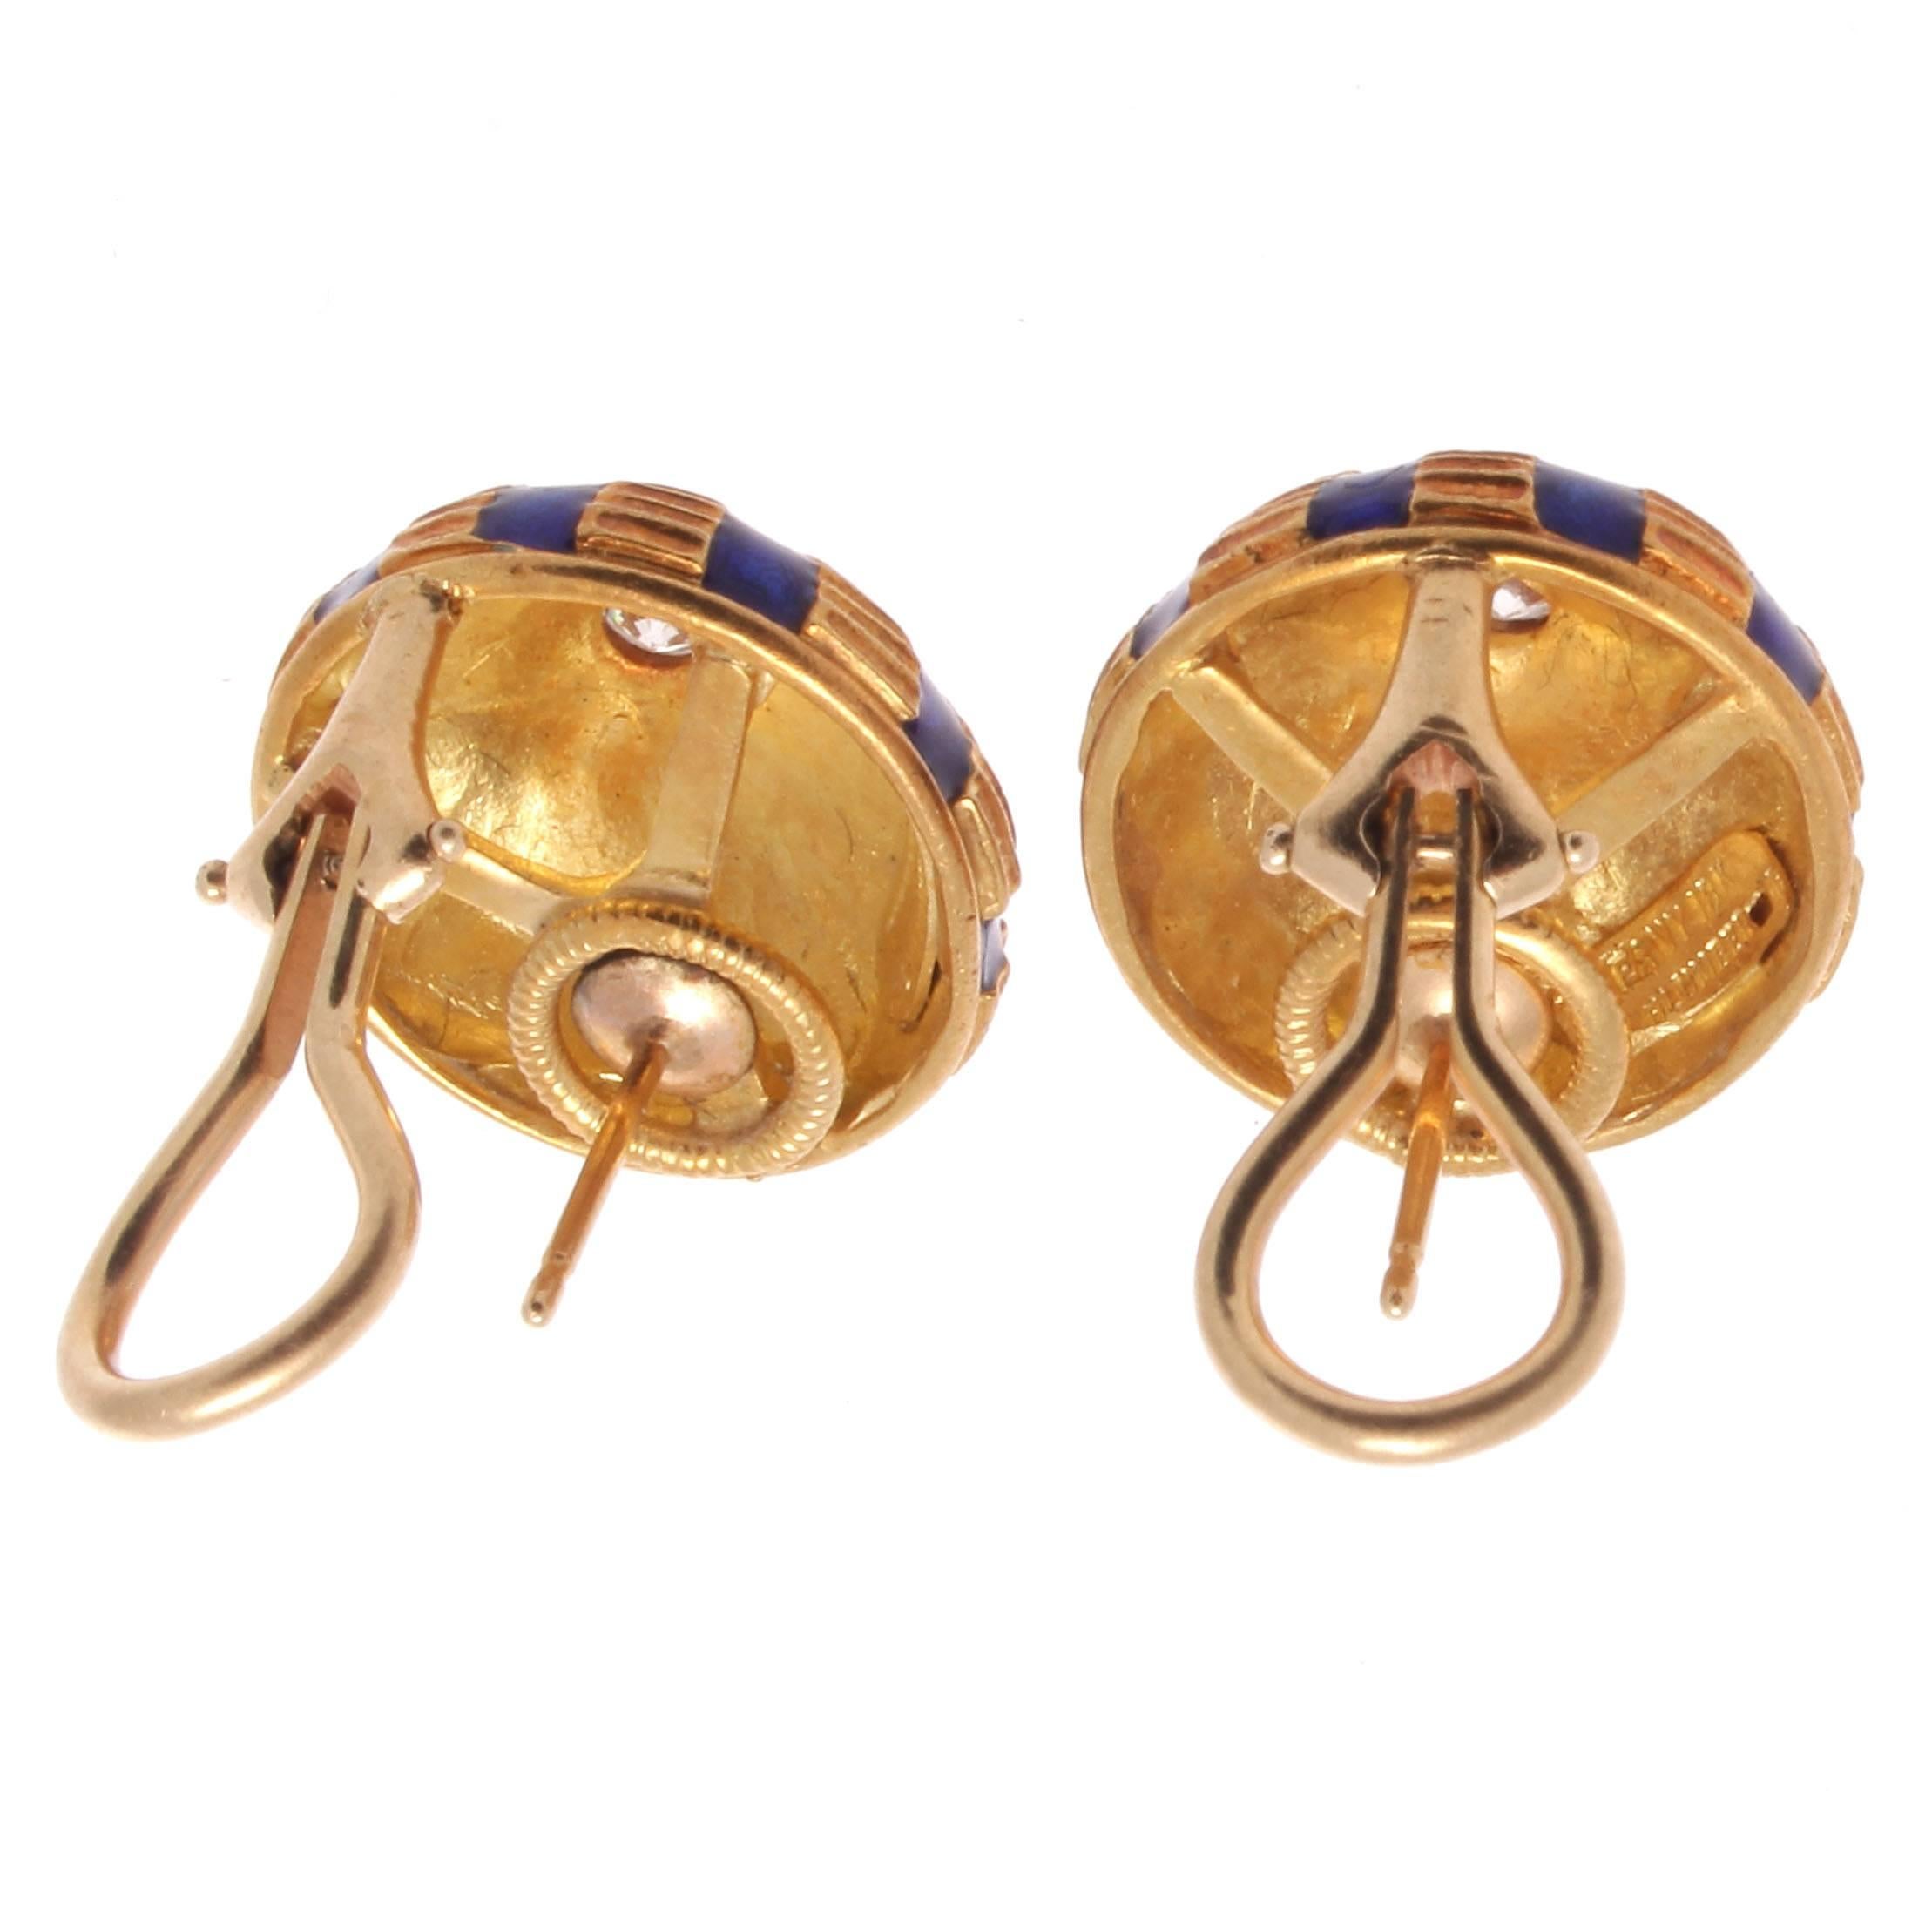 The Tiffany Schlumberger brand is still one of their most sought after collections, featuring futuristic designs and meticulous attention to detail. The earrings are comprised of a beautiful half globe of glistening fluted 18k gold featuring a